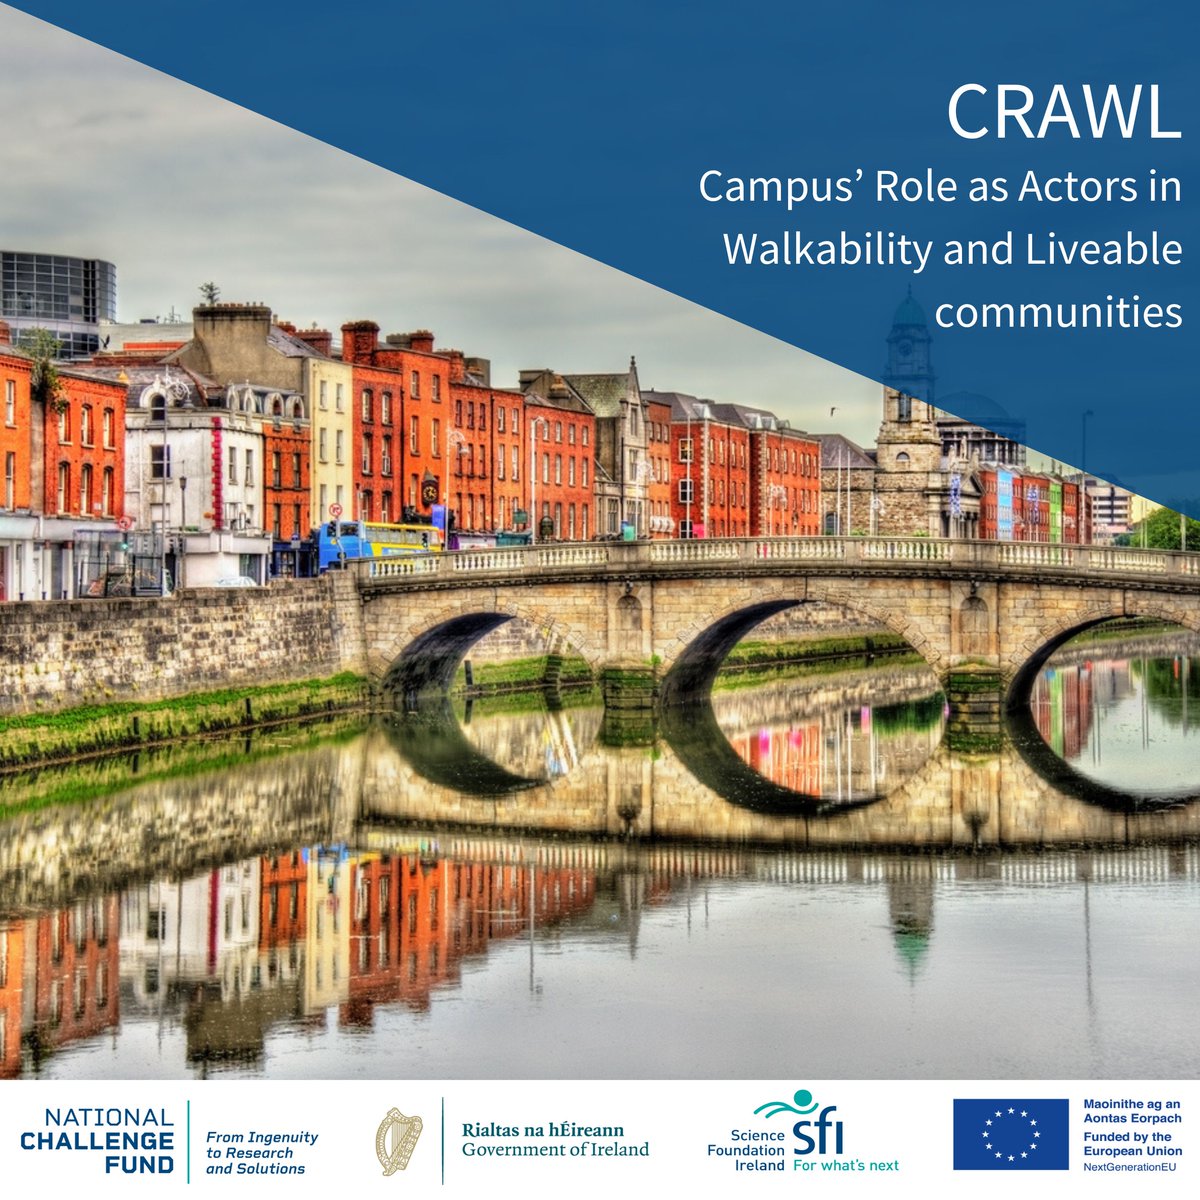 .@TUDublin_CRAWL is a #NationalChallengeFund project that aims to make @WeAreTUDublin's campus locations and their surrounding neighbourhoods more walkable and liveable. This project is on display at @TRA_Conference this week. See:sfi.ie/challenges/sus… #NextGenerationEU #TRA24